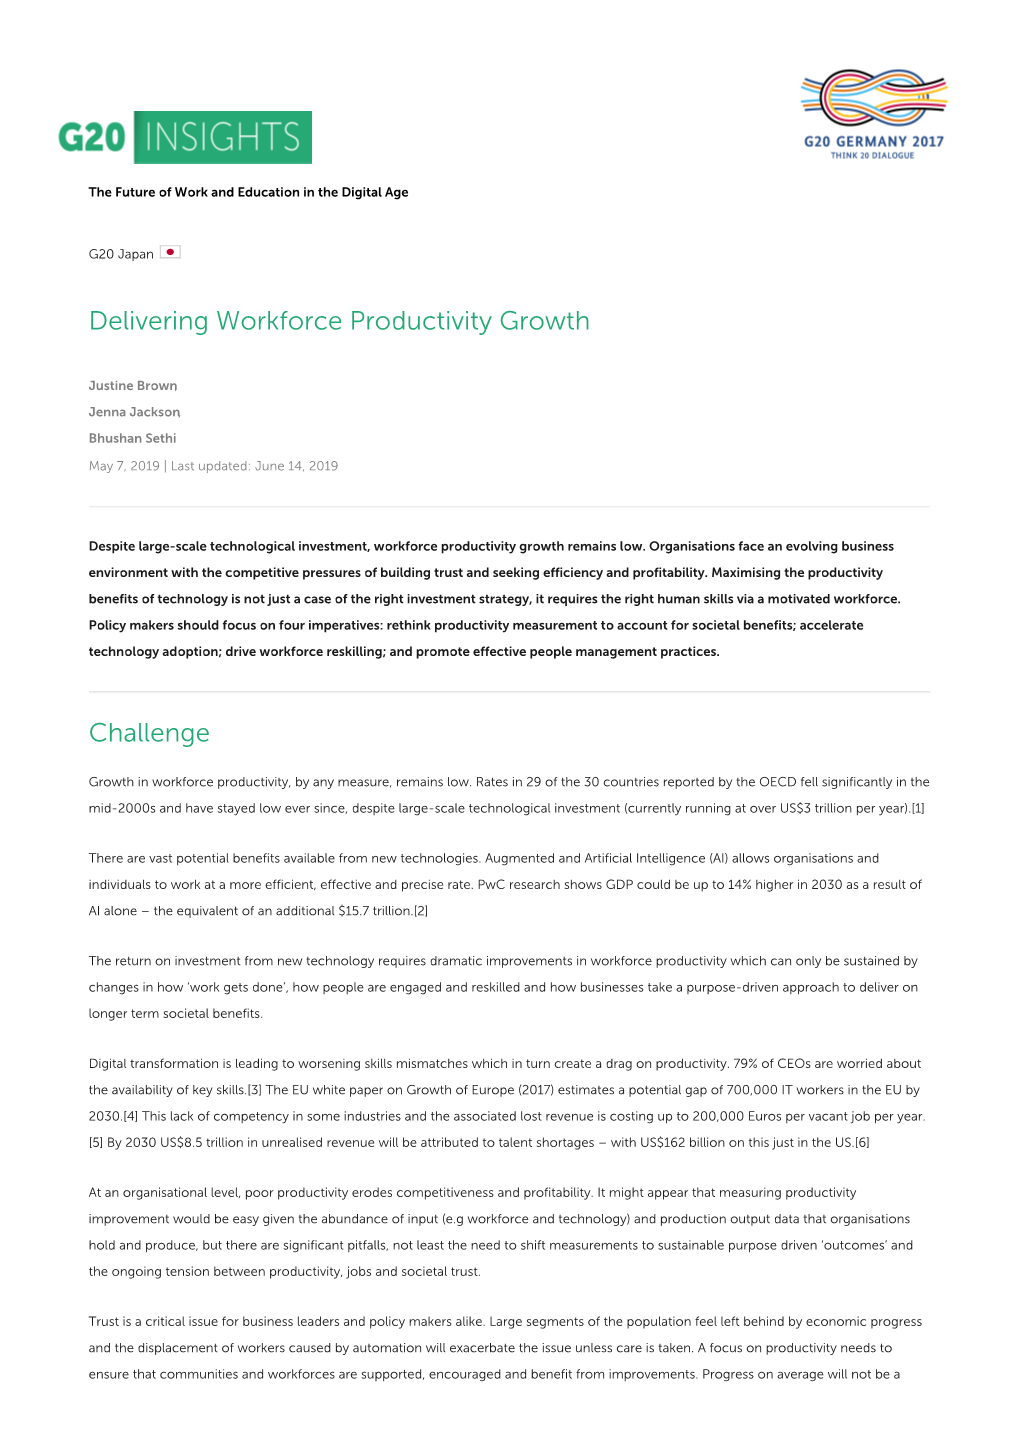 Delivering Workforce Productivity Growth